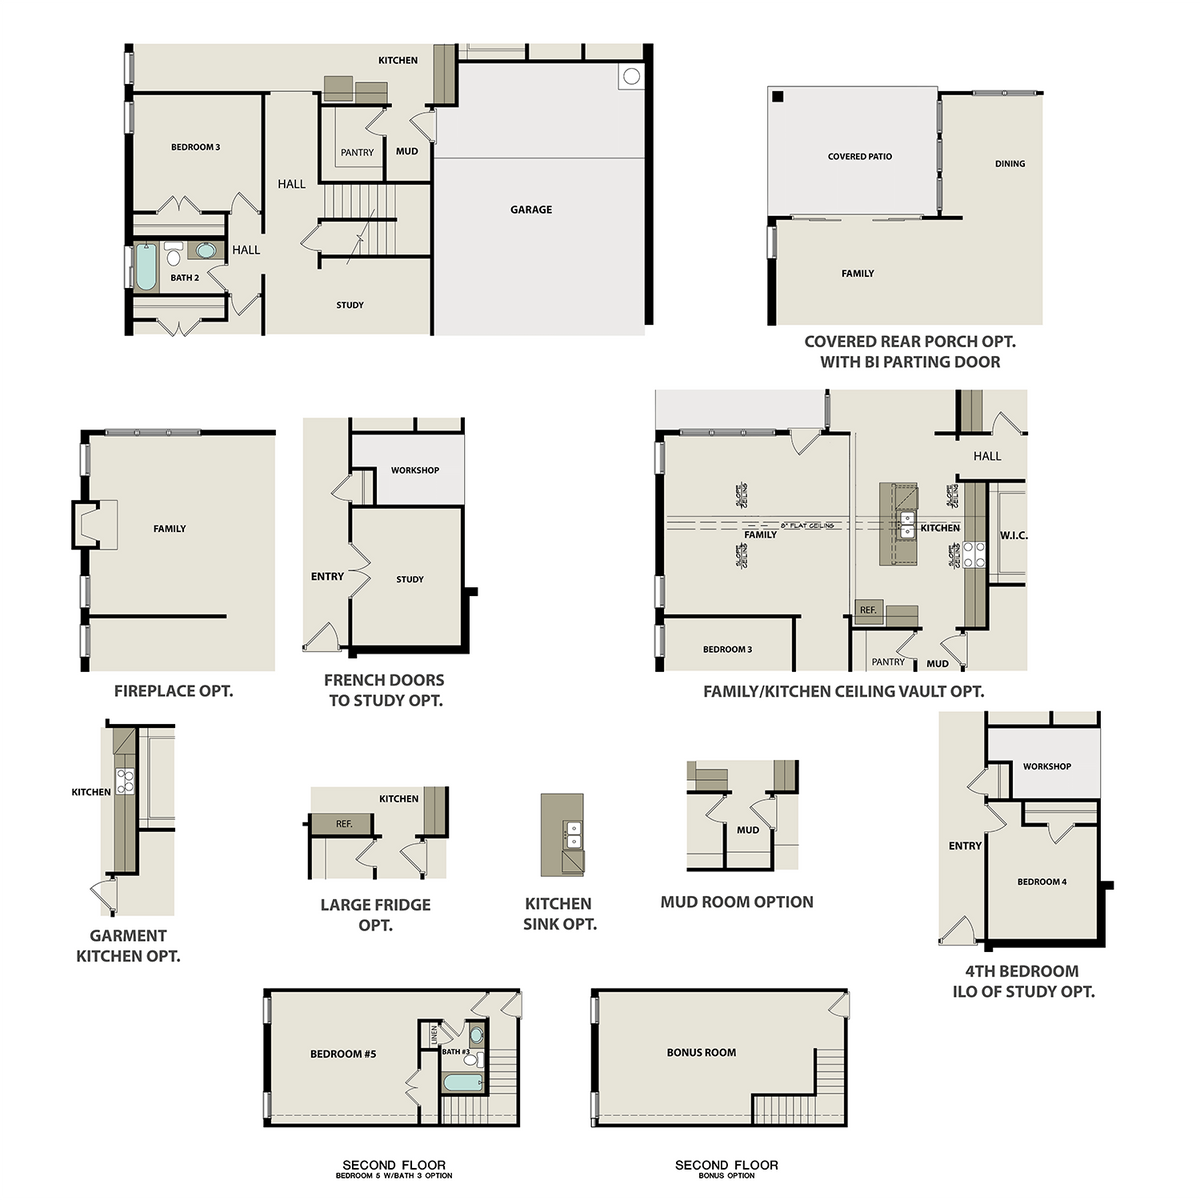 3 - The Ansley B with Bonus buildable floor plan layout in Davidson Homes' Carellton community.